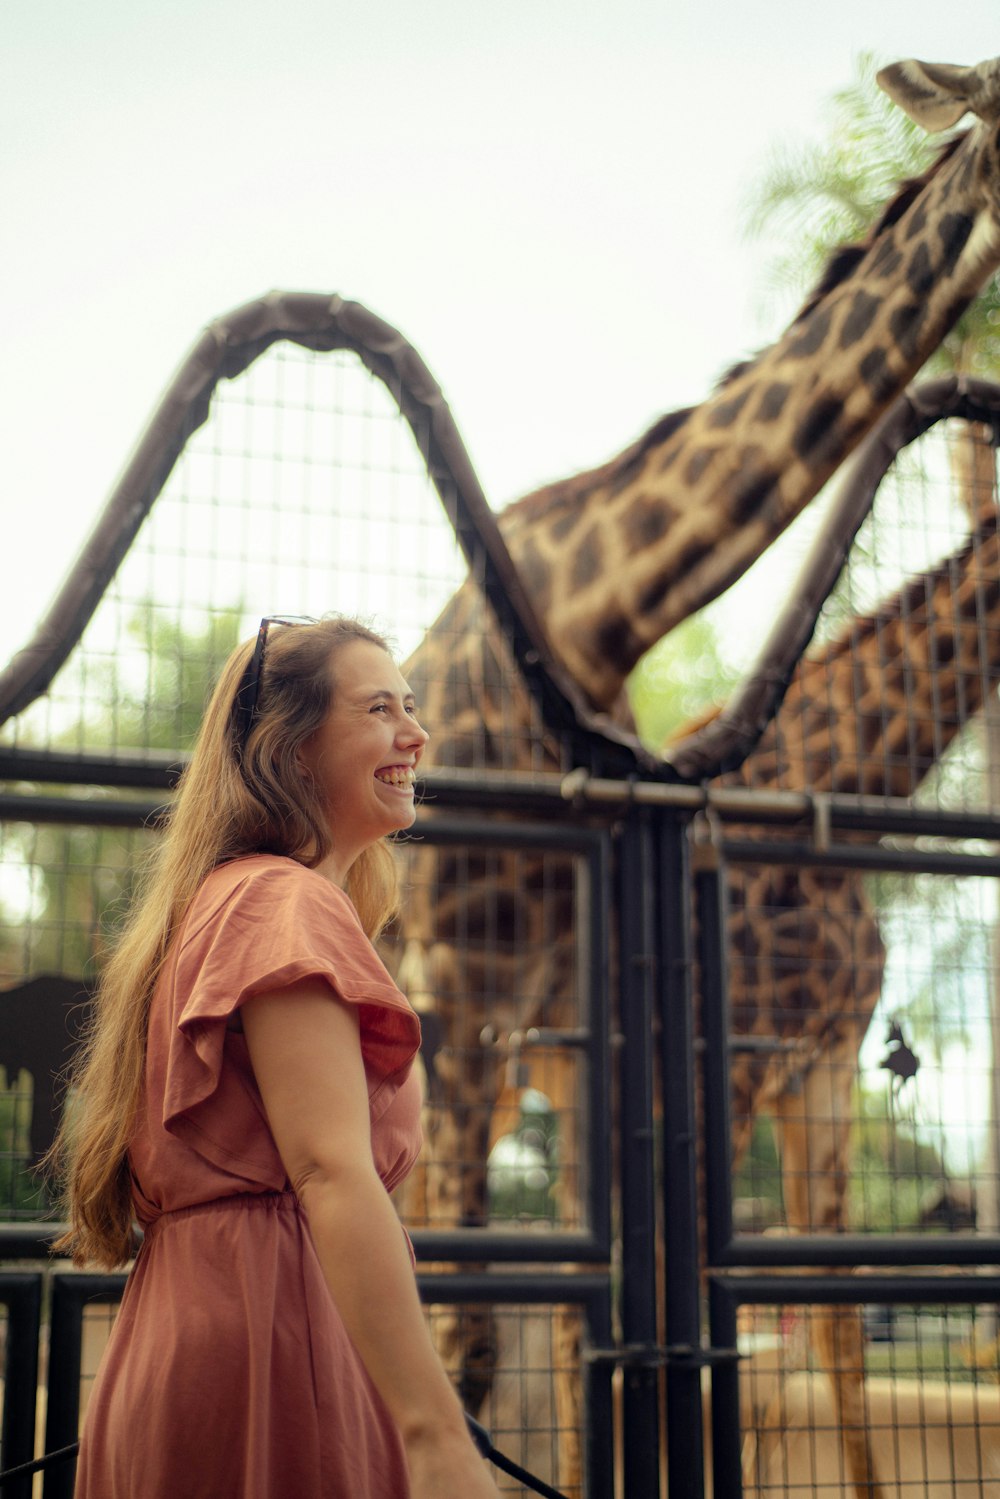 a woman smiling at a giraffe behind a fence